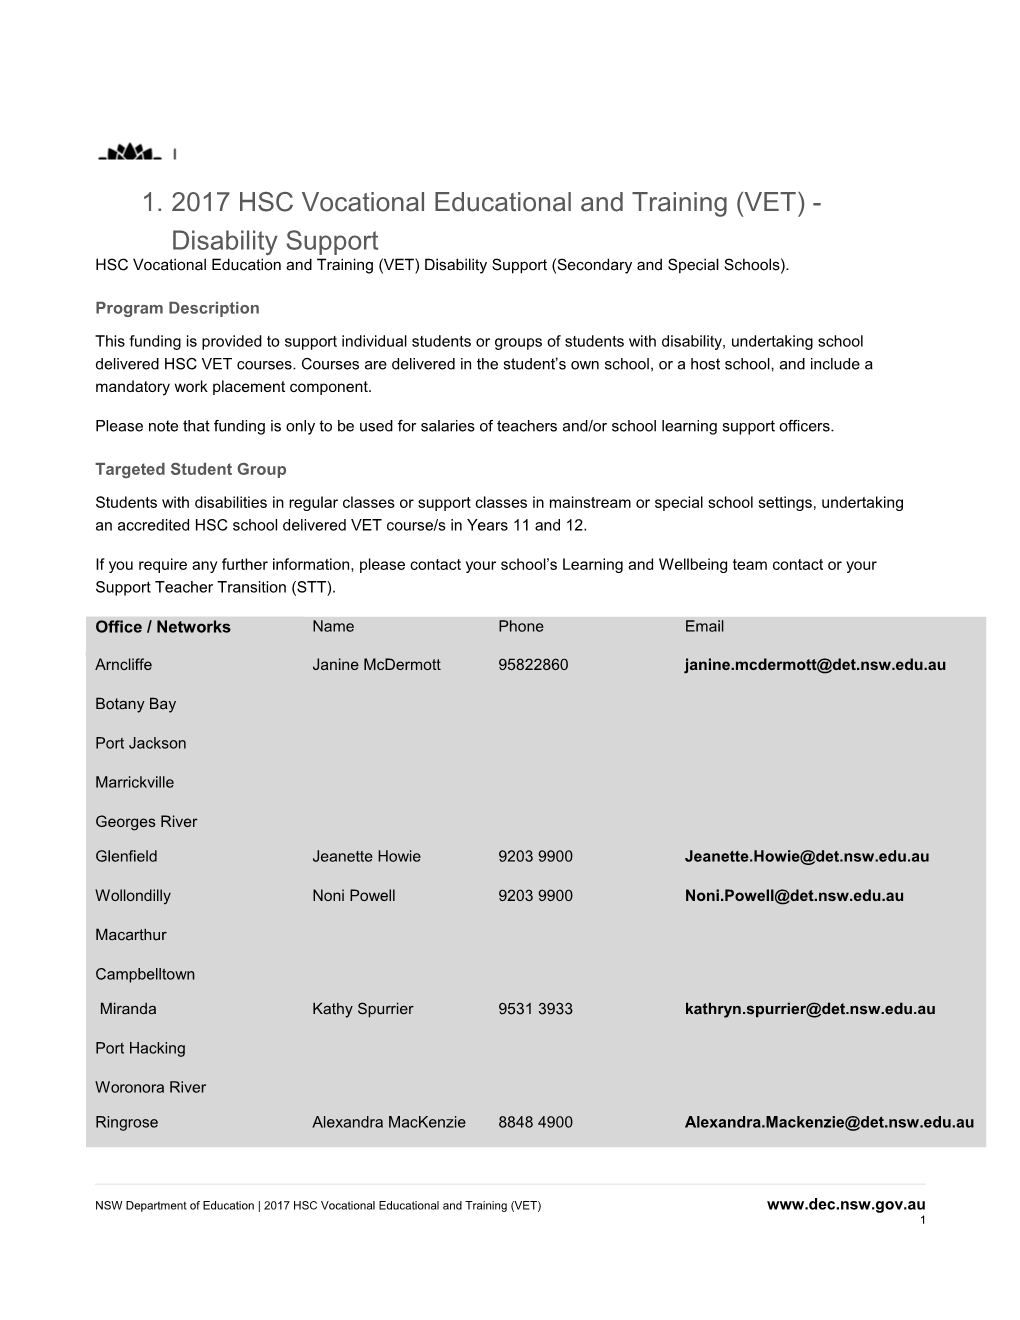 2017 HSC Vocational Educational and Training (VET) - Disability Support